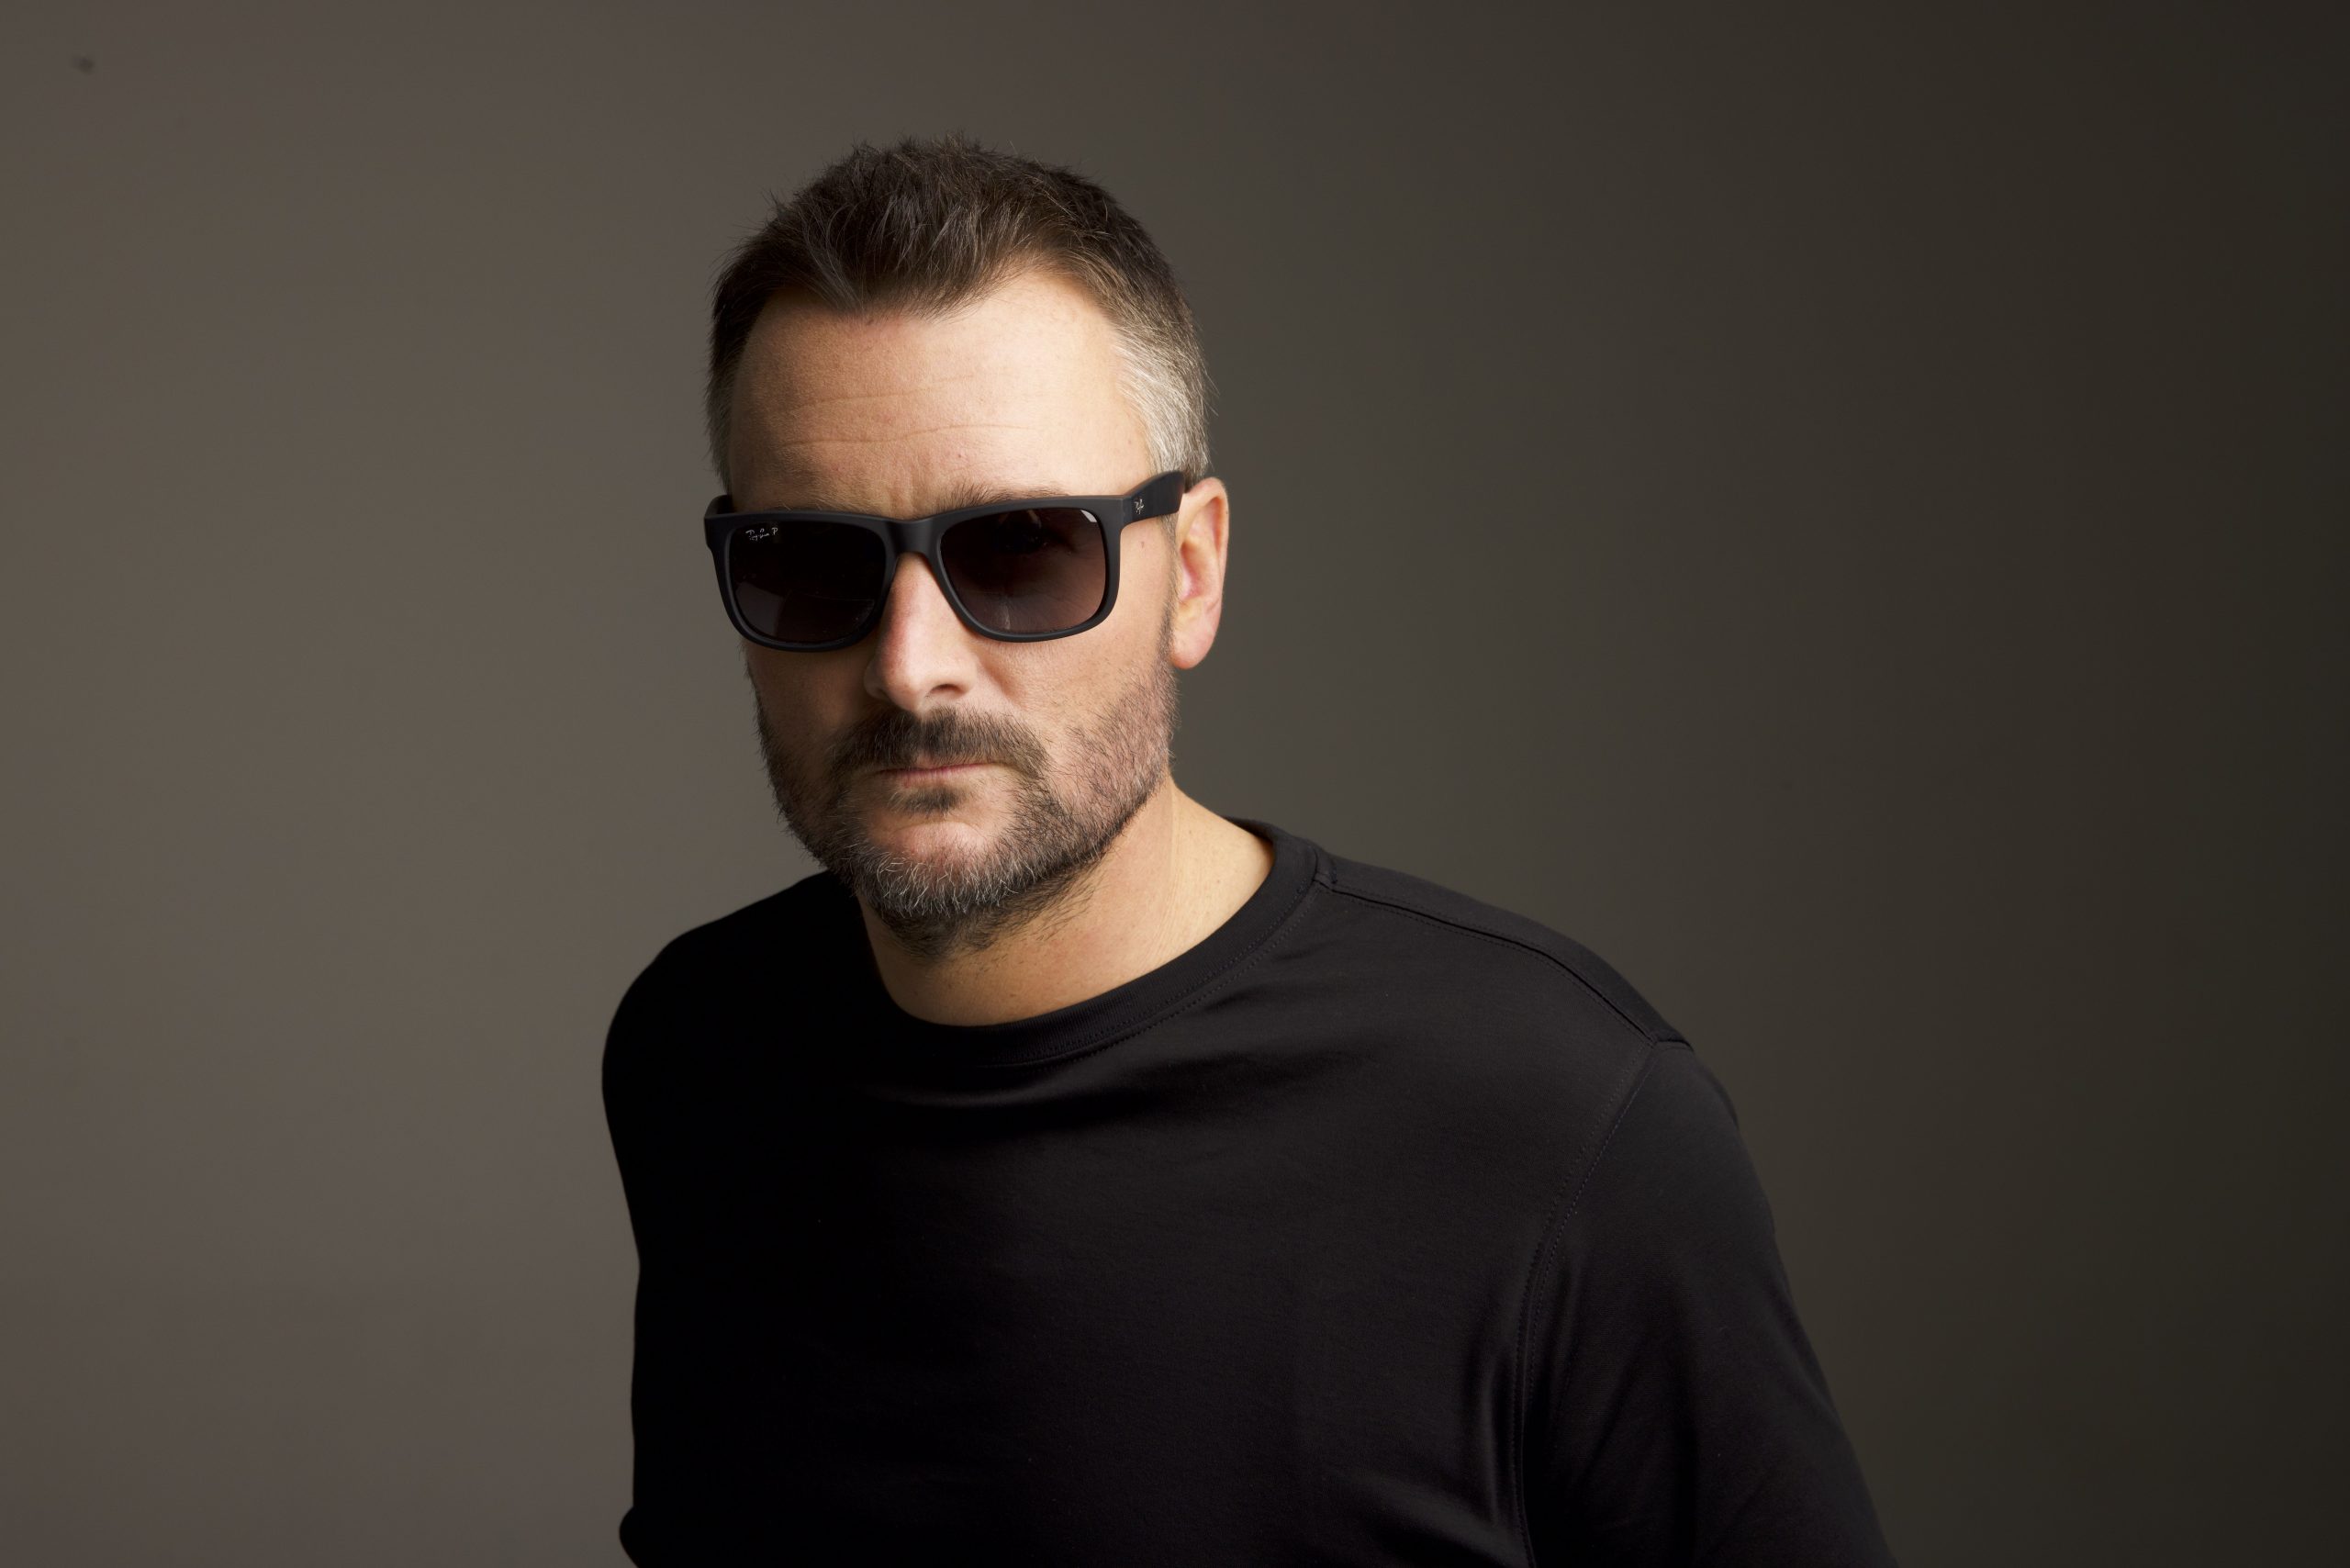 ERIC CHURCH GIVES CHIEF’S BUILDING TO HIS FANS